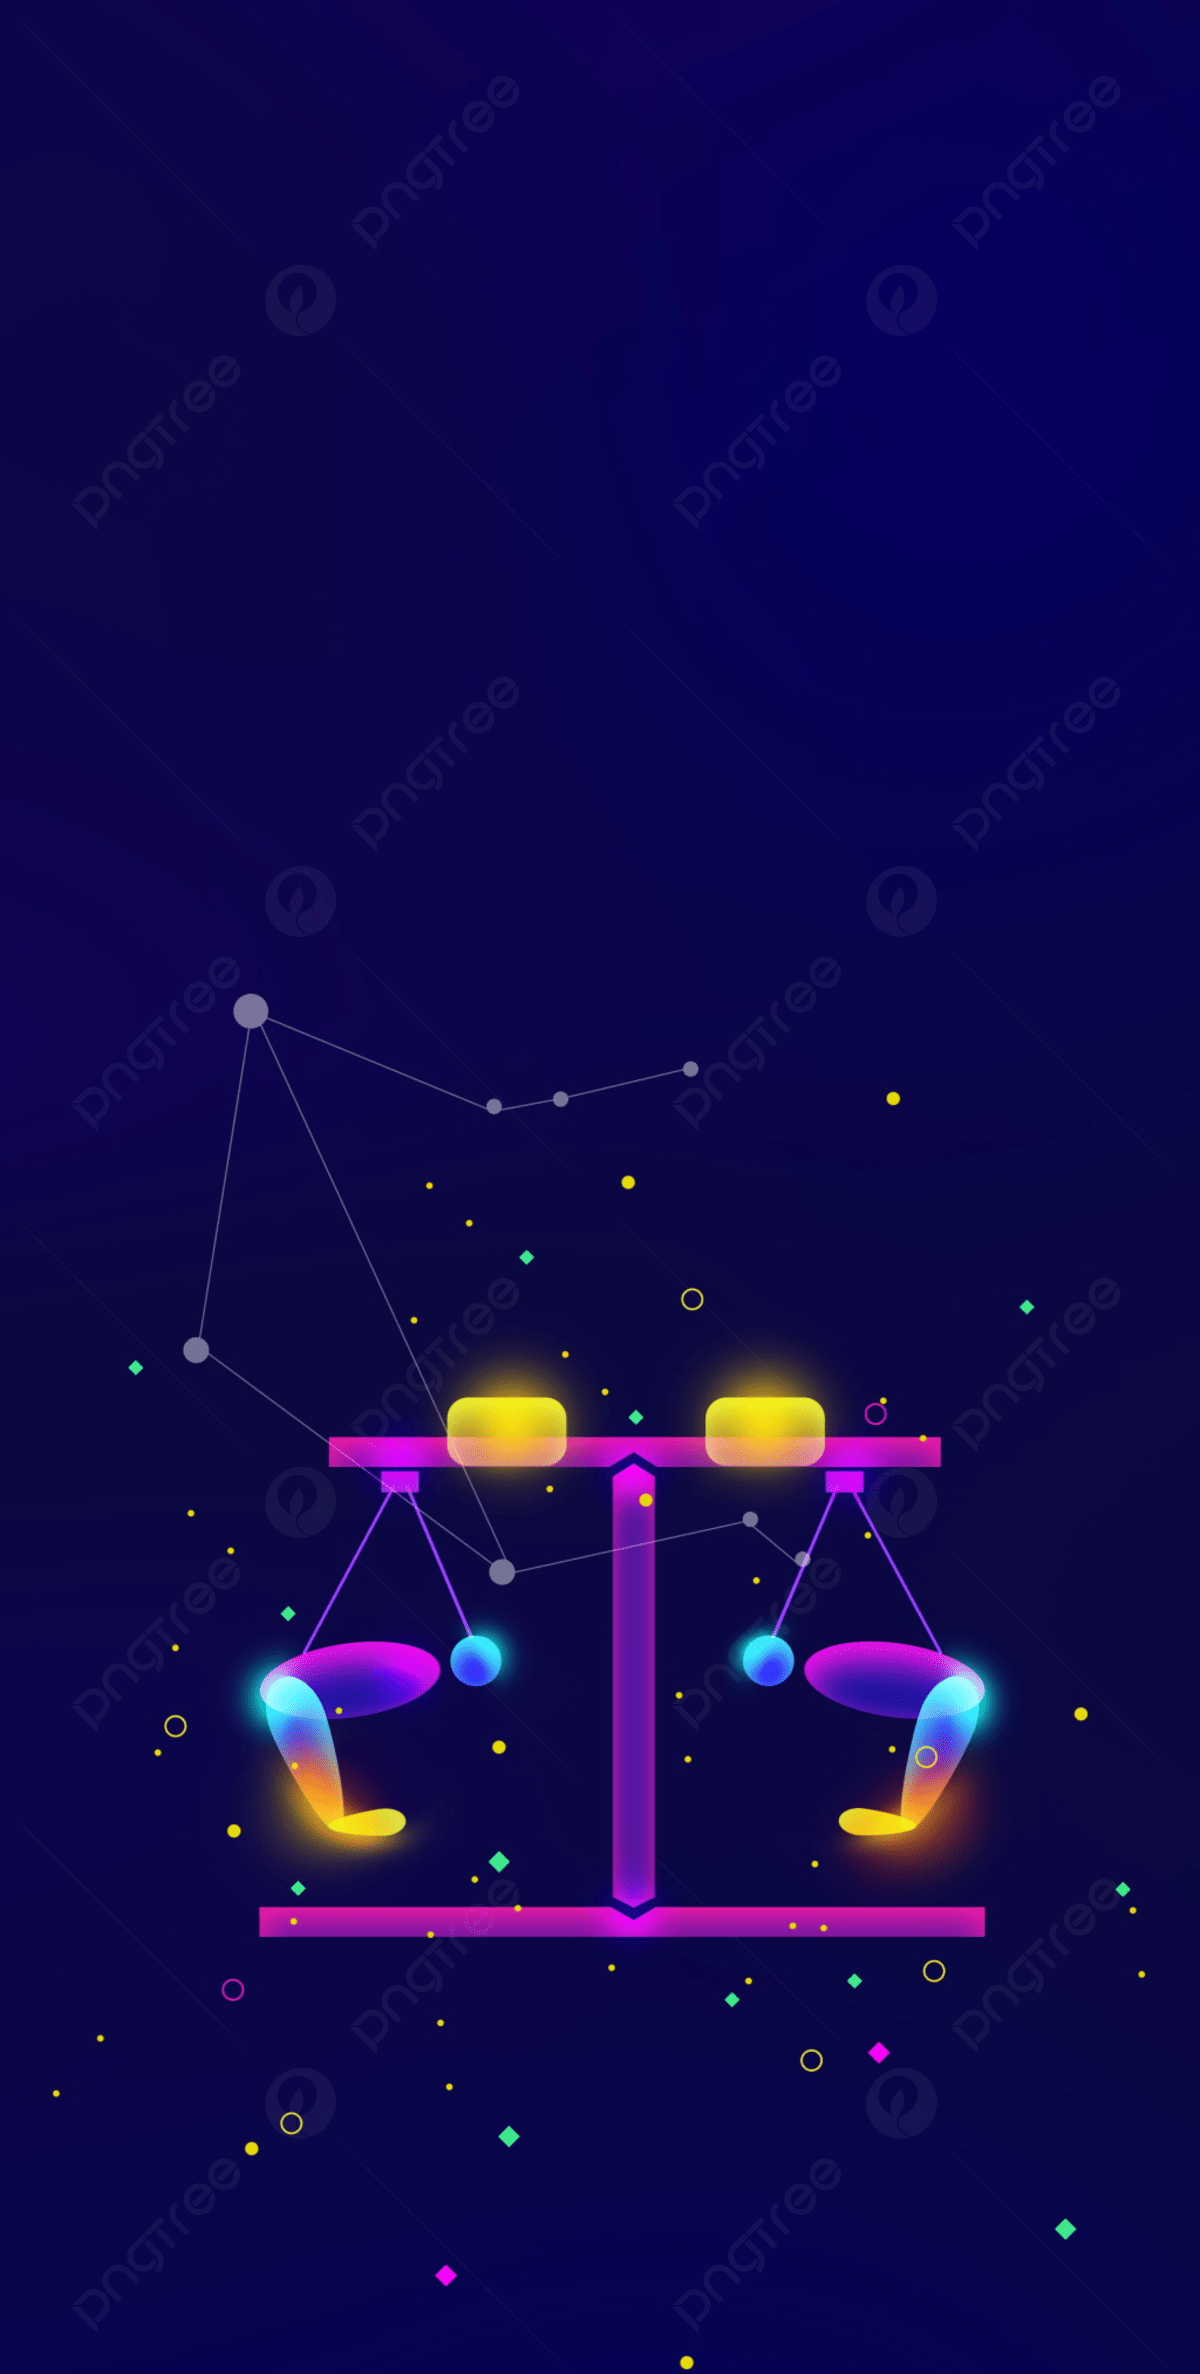 Libra Constellation Background Image, HD Picture and Wallpaper For Free Download